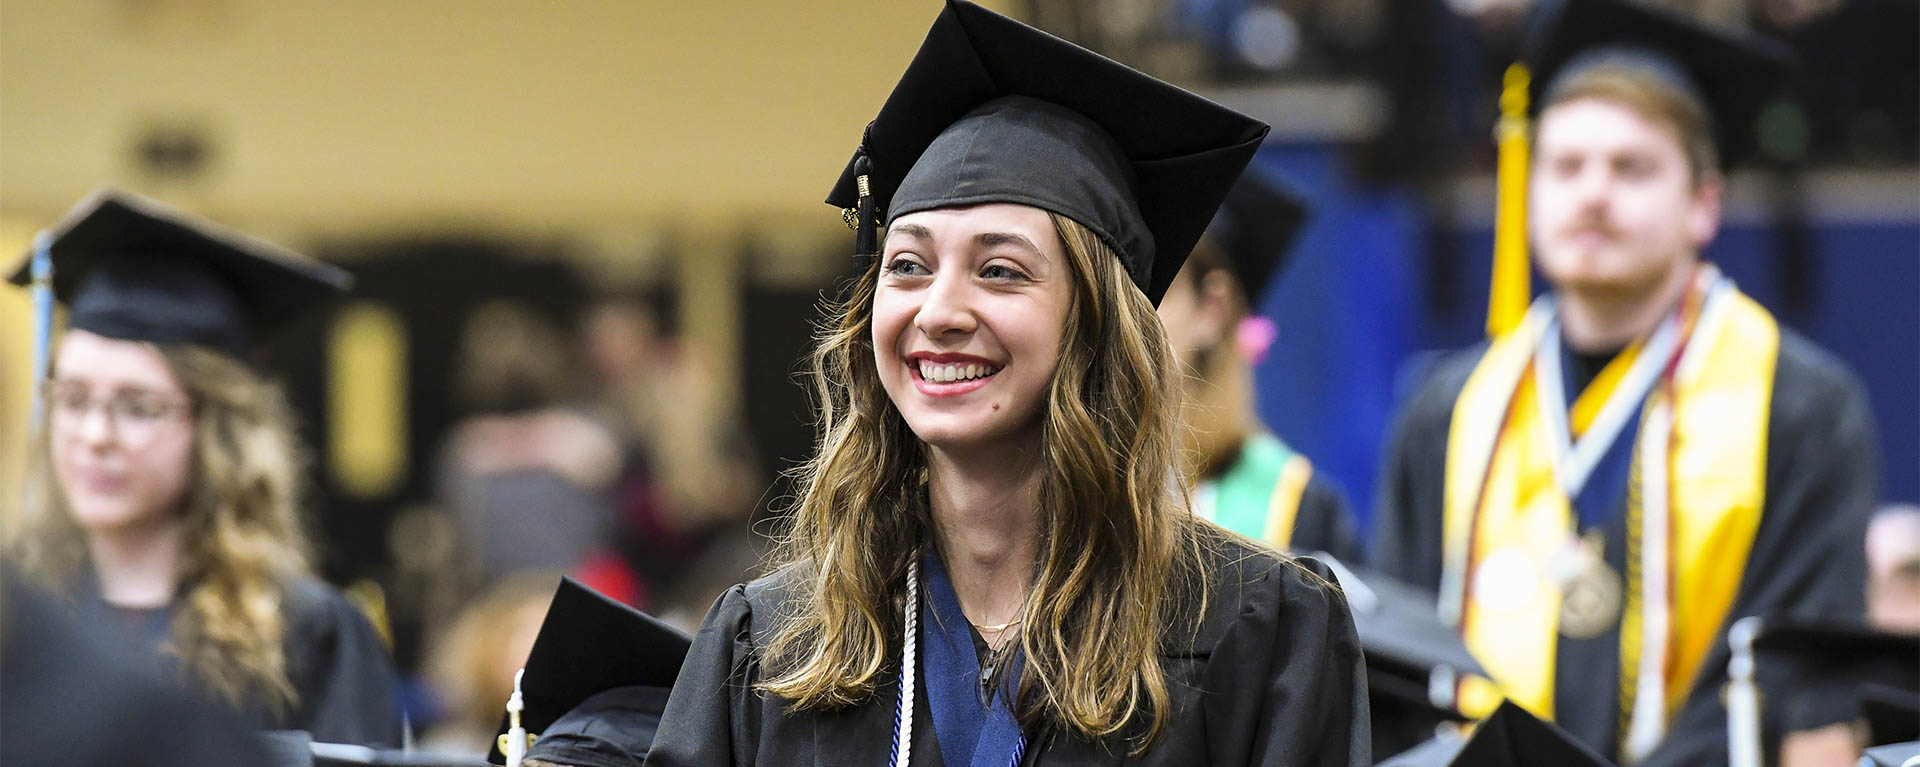 A student smiles while being recognized during a graduation ceremony.